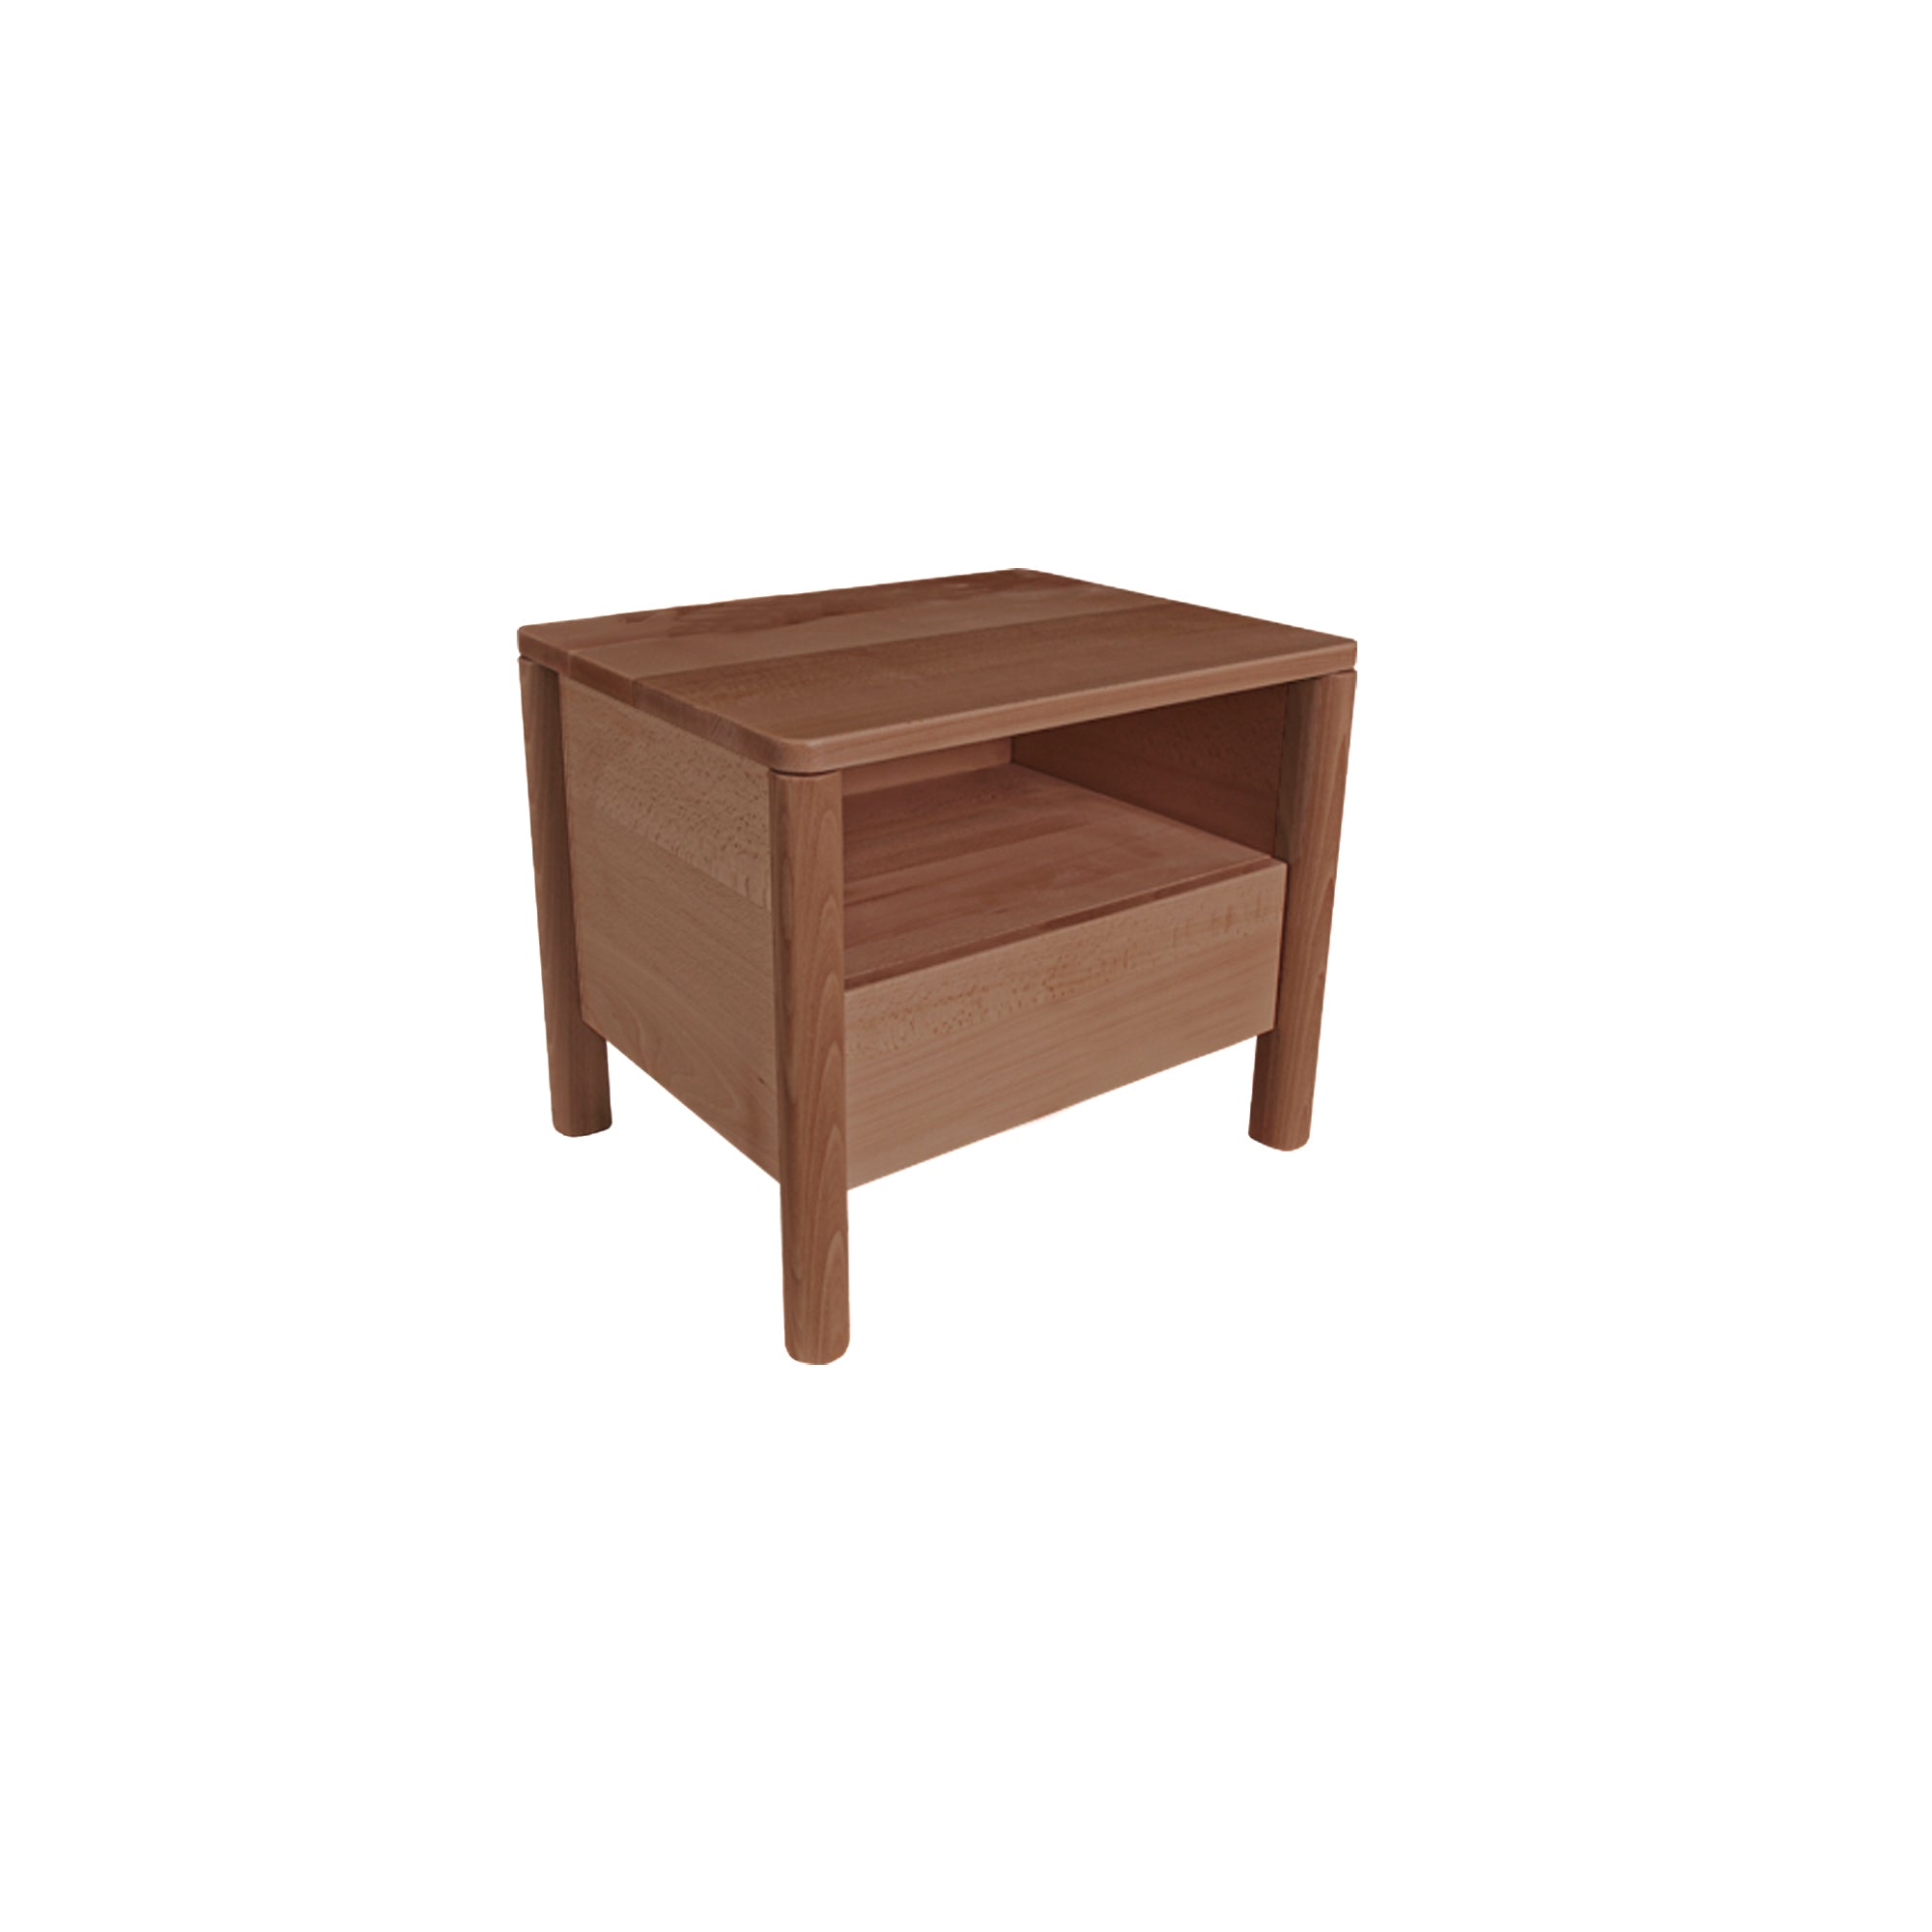 DROP Bedside Table, Beech Wood without doors walnut colour